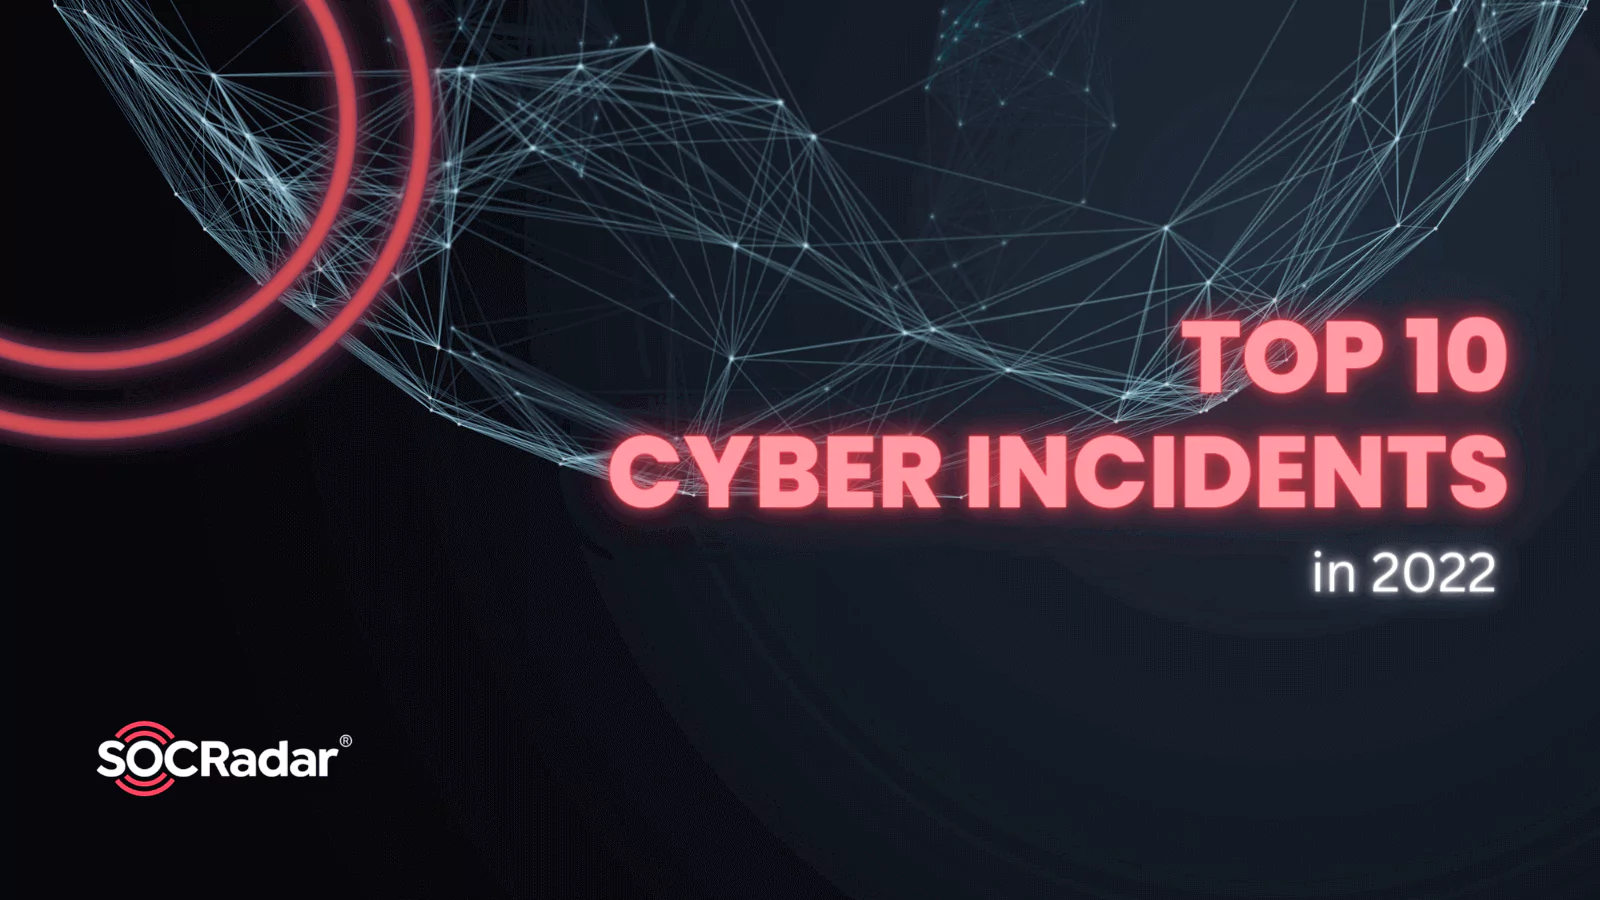 SOCRadar® Cyber Intelligence Inc. | <strong>Top 10 Cyber Incidents in 2022</strong>